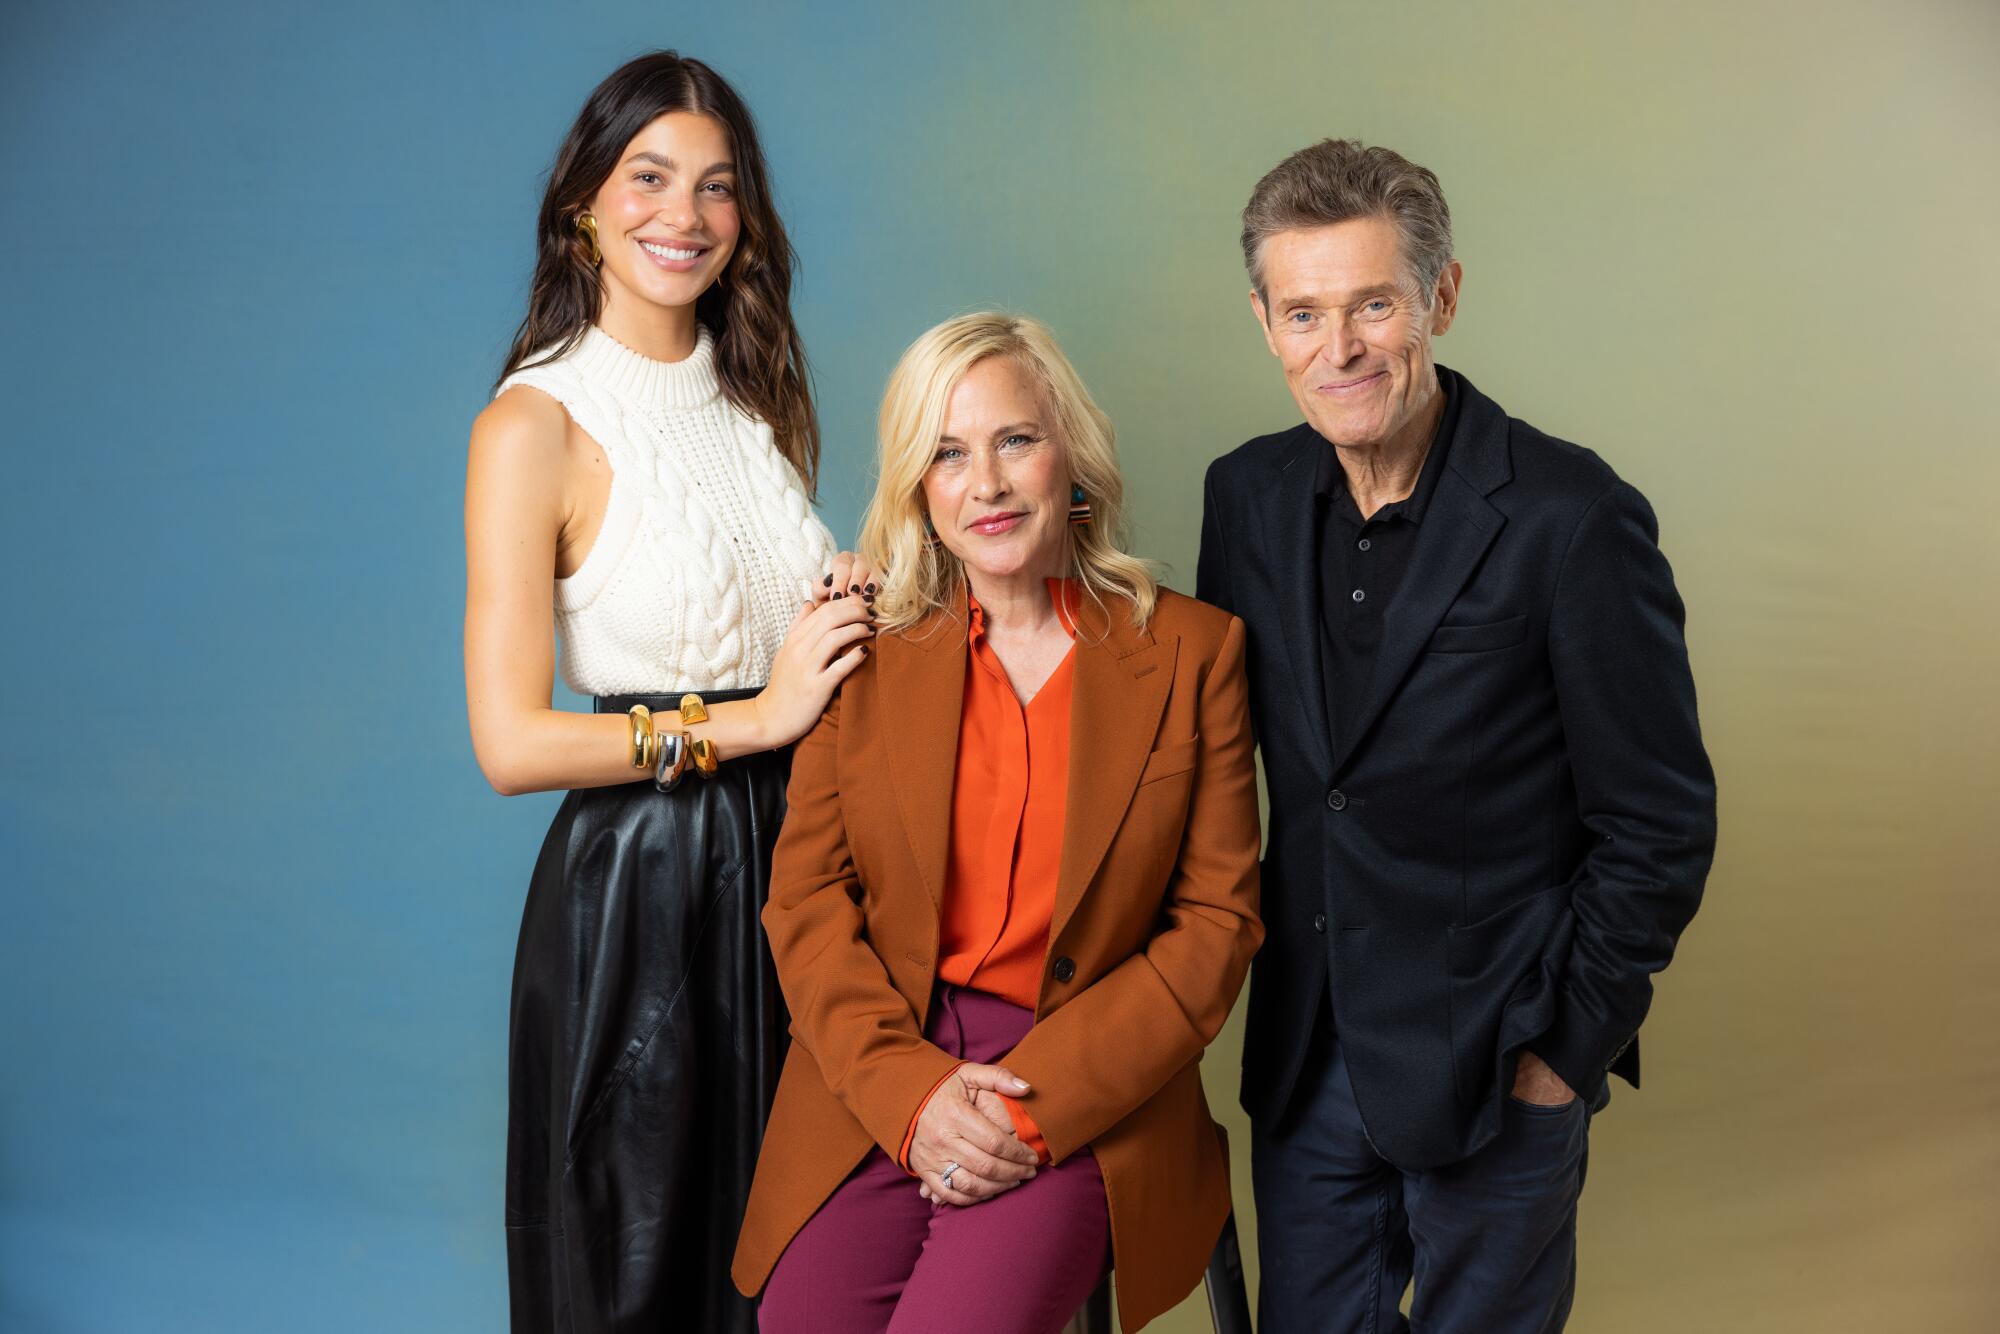 Camila Morrone, Patricia Arquette and Willem Dafoe pose together and smile.